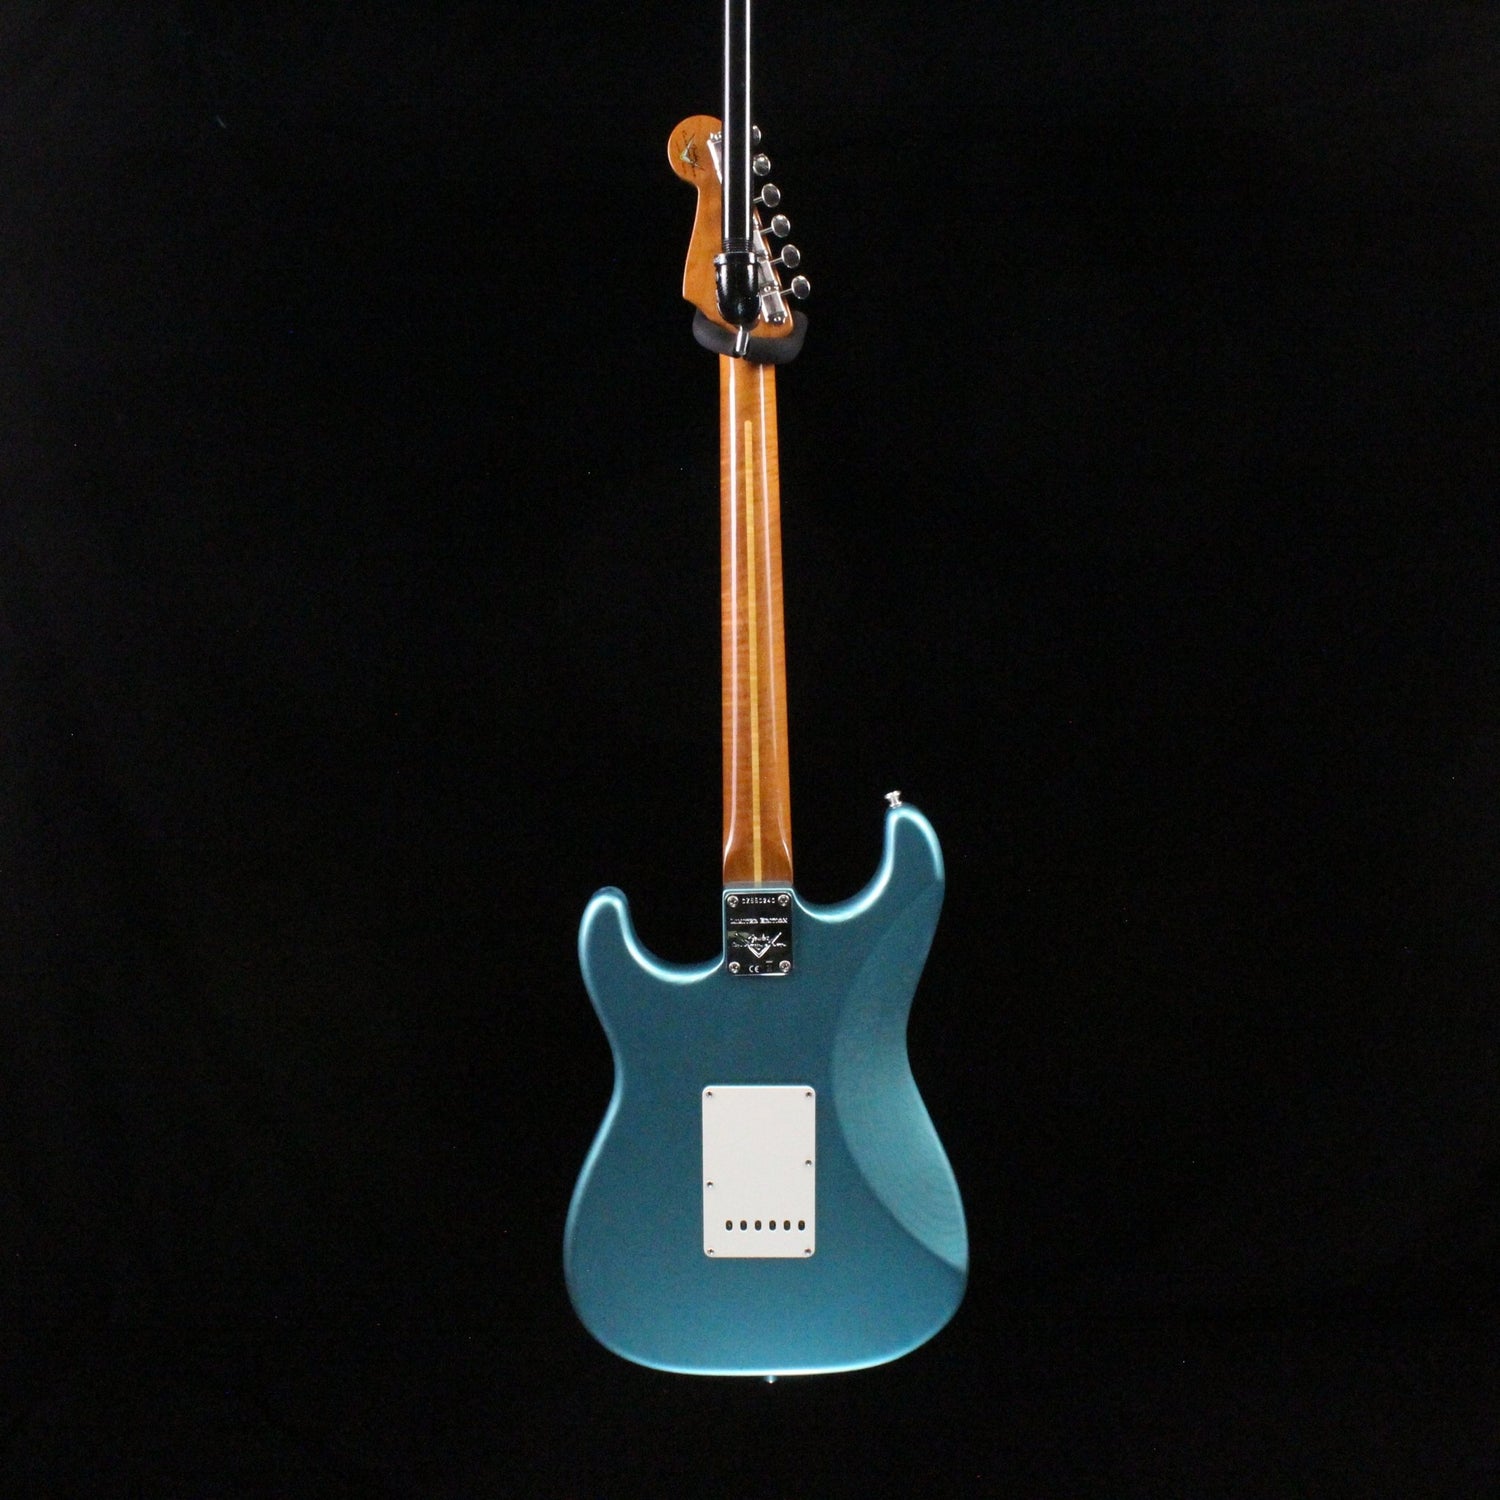 Fender Limited Roasted Pine Stratocaster Relic - Express Shipping - (F-254) Serial: CZ550240 - PLEK'd-25-Righteous Guitars